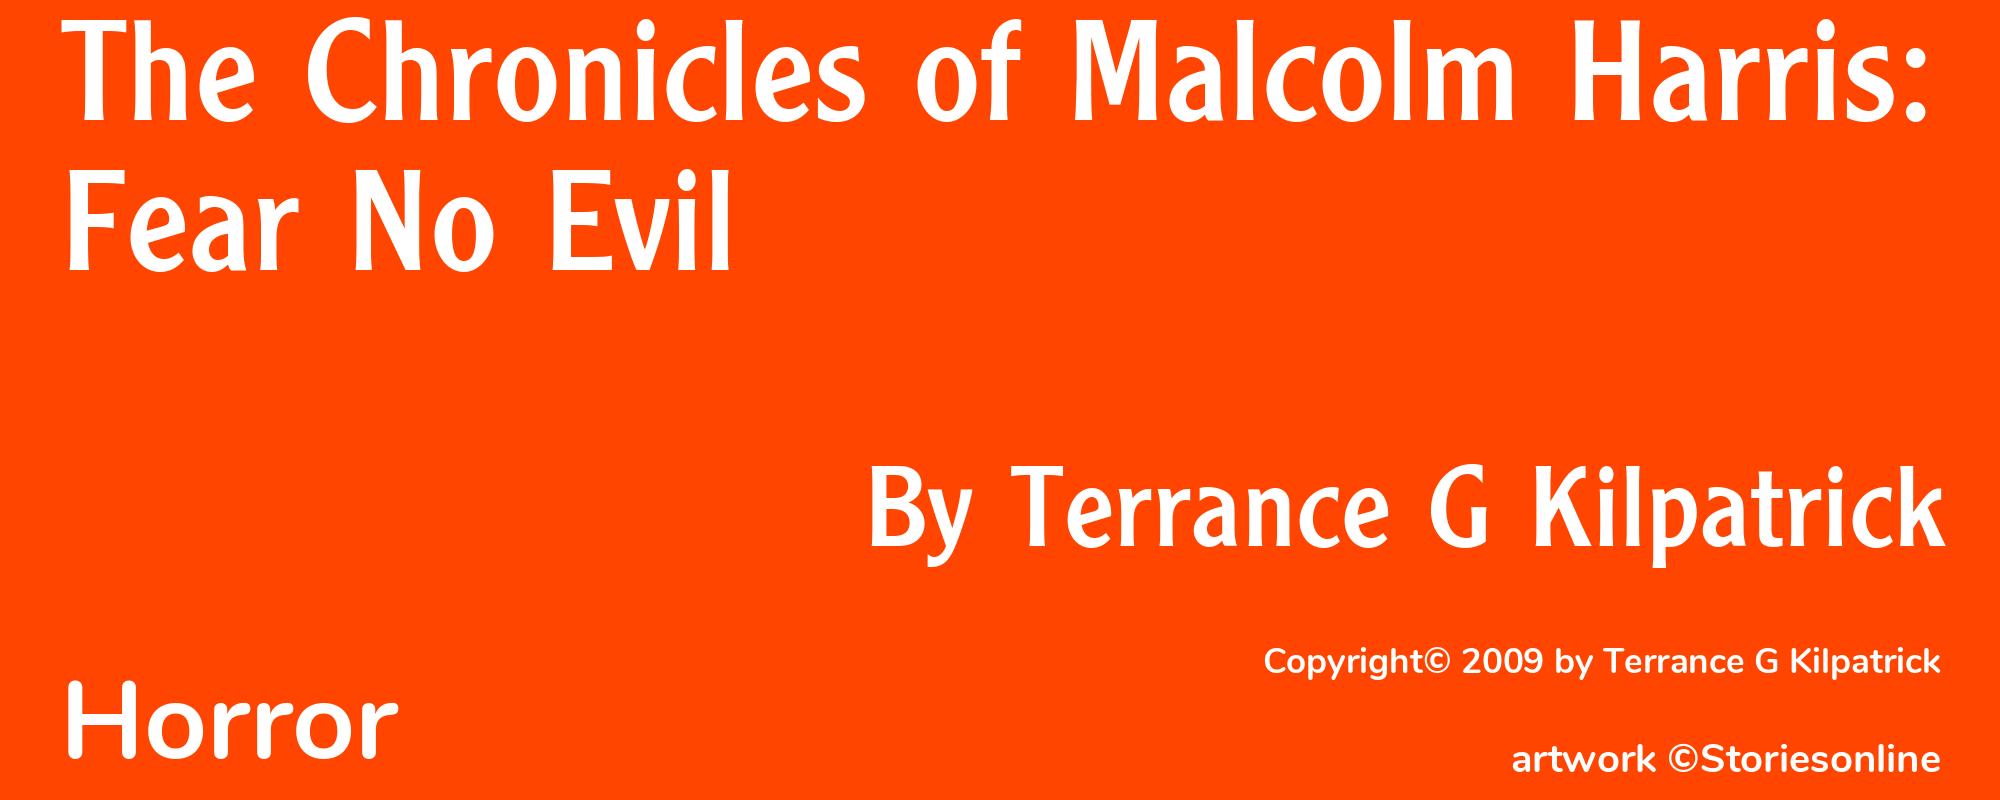 The Chronicles of Malcolm Harris: Fear No Evil - Cover